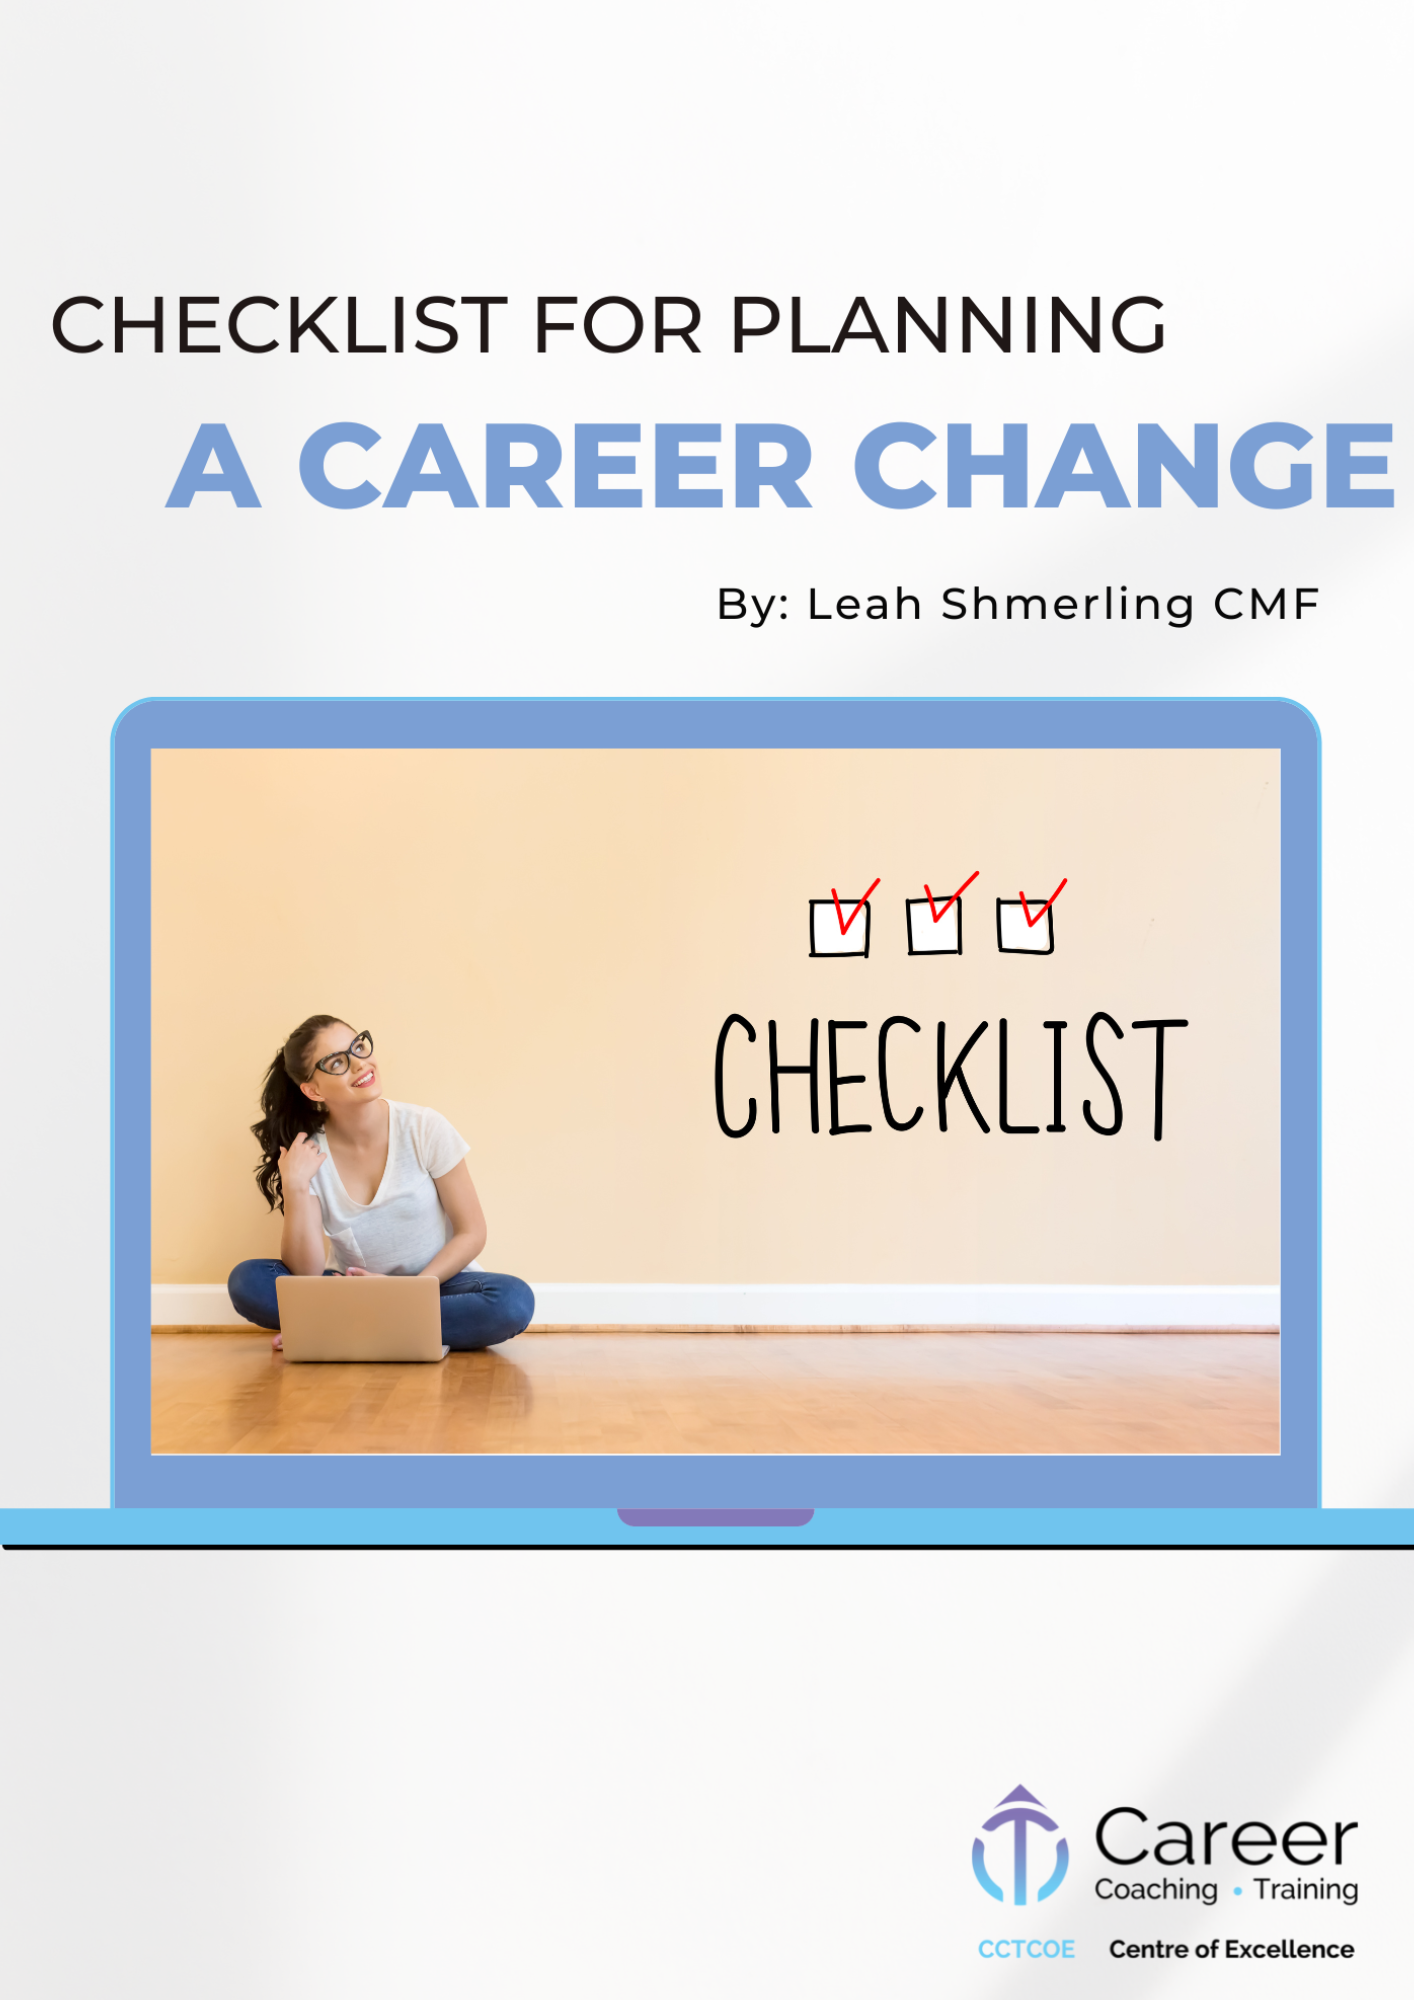 Checklist for Planning a Career Change